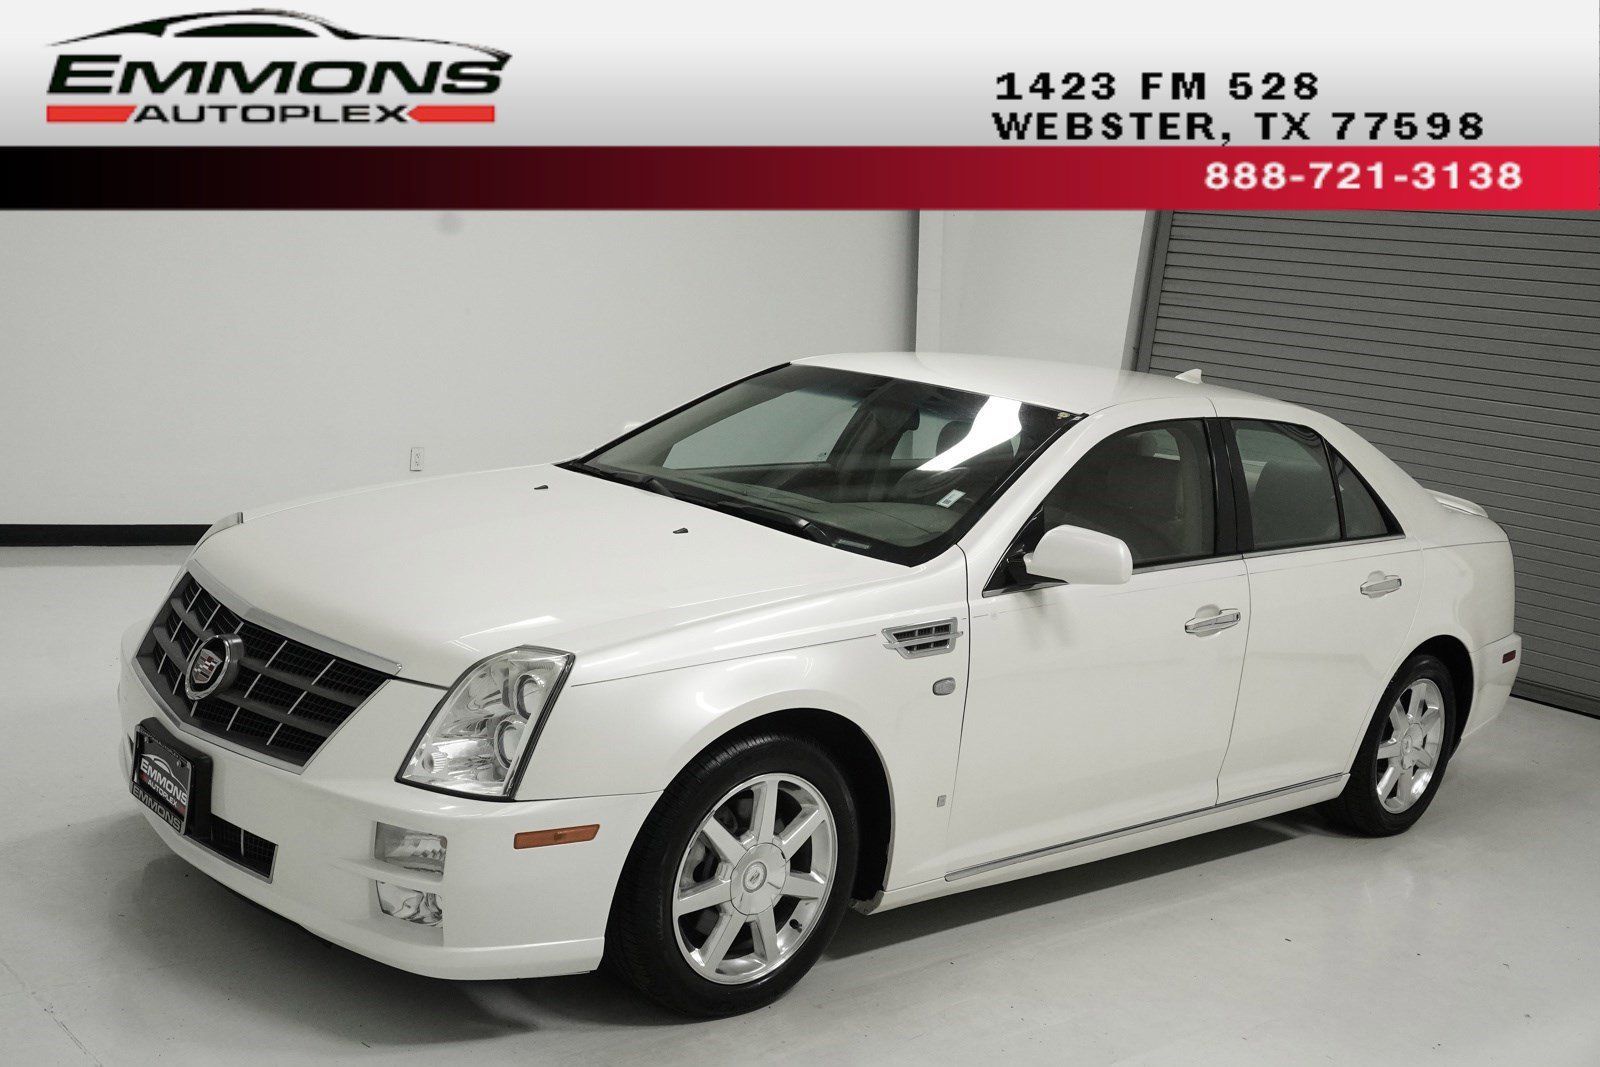 Used 2009 Cadillac STS